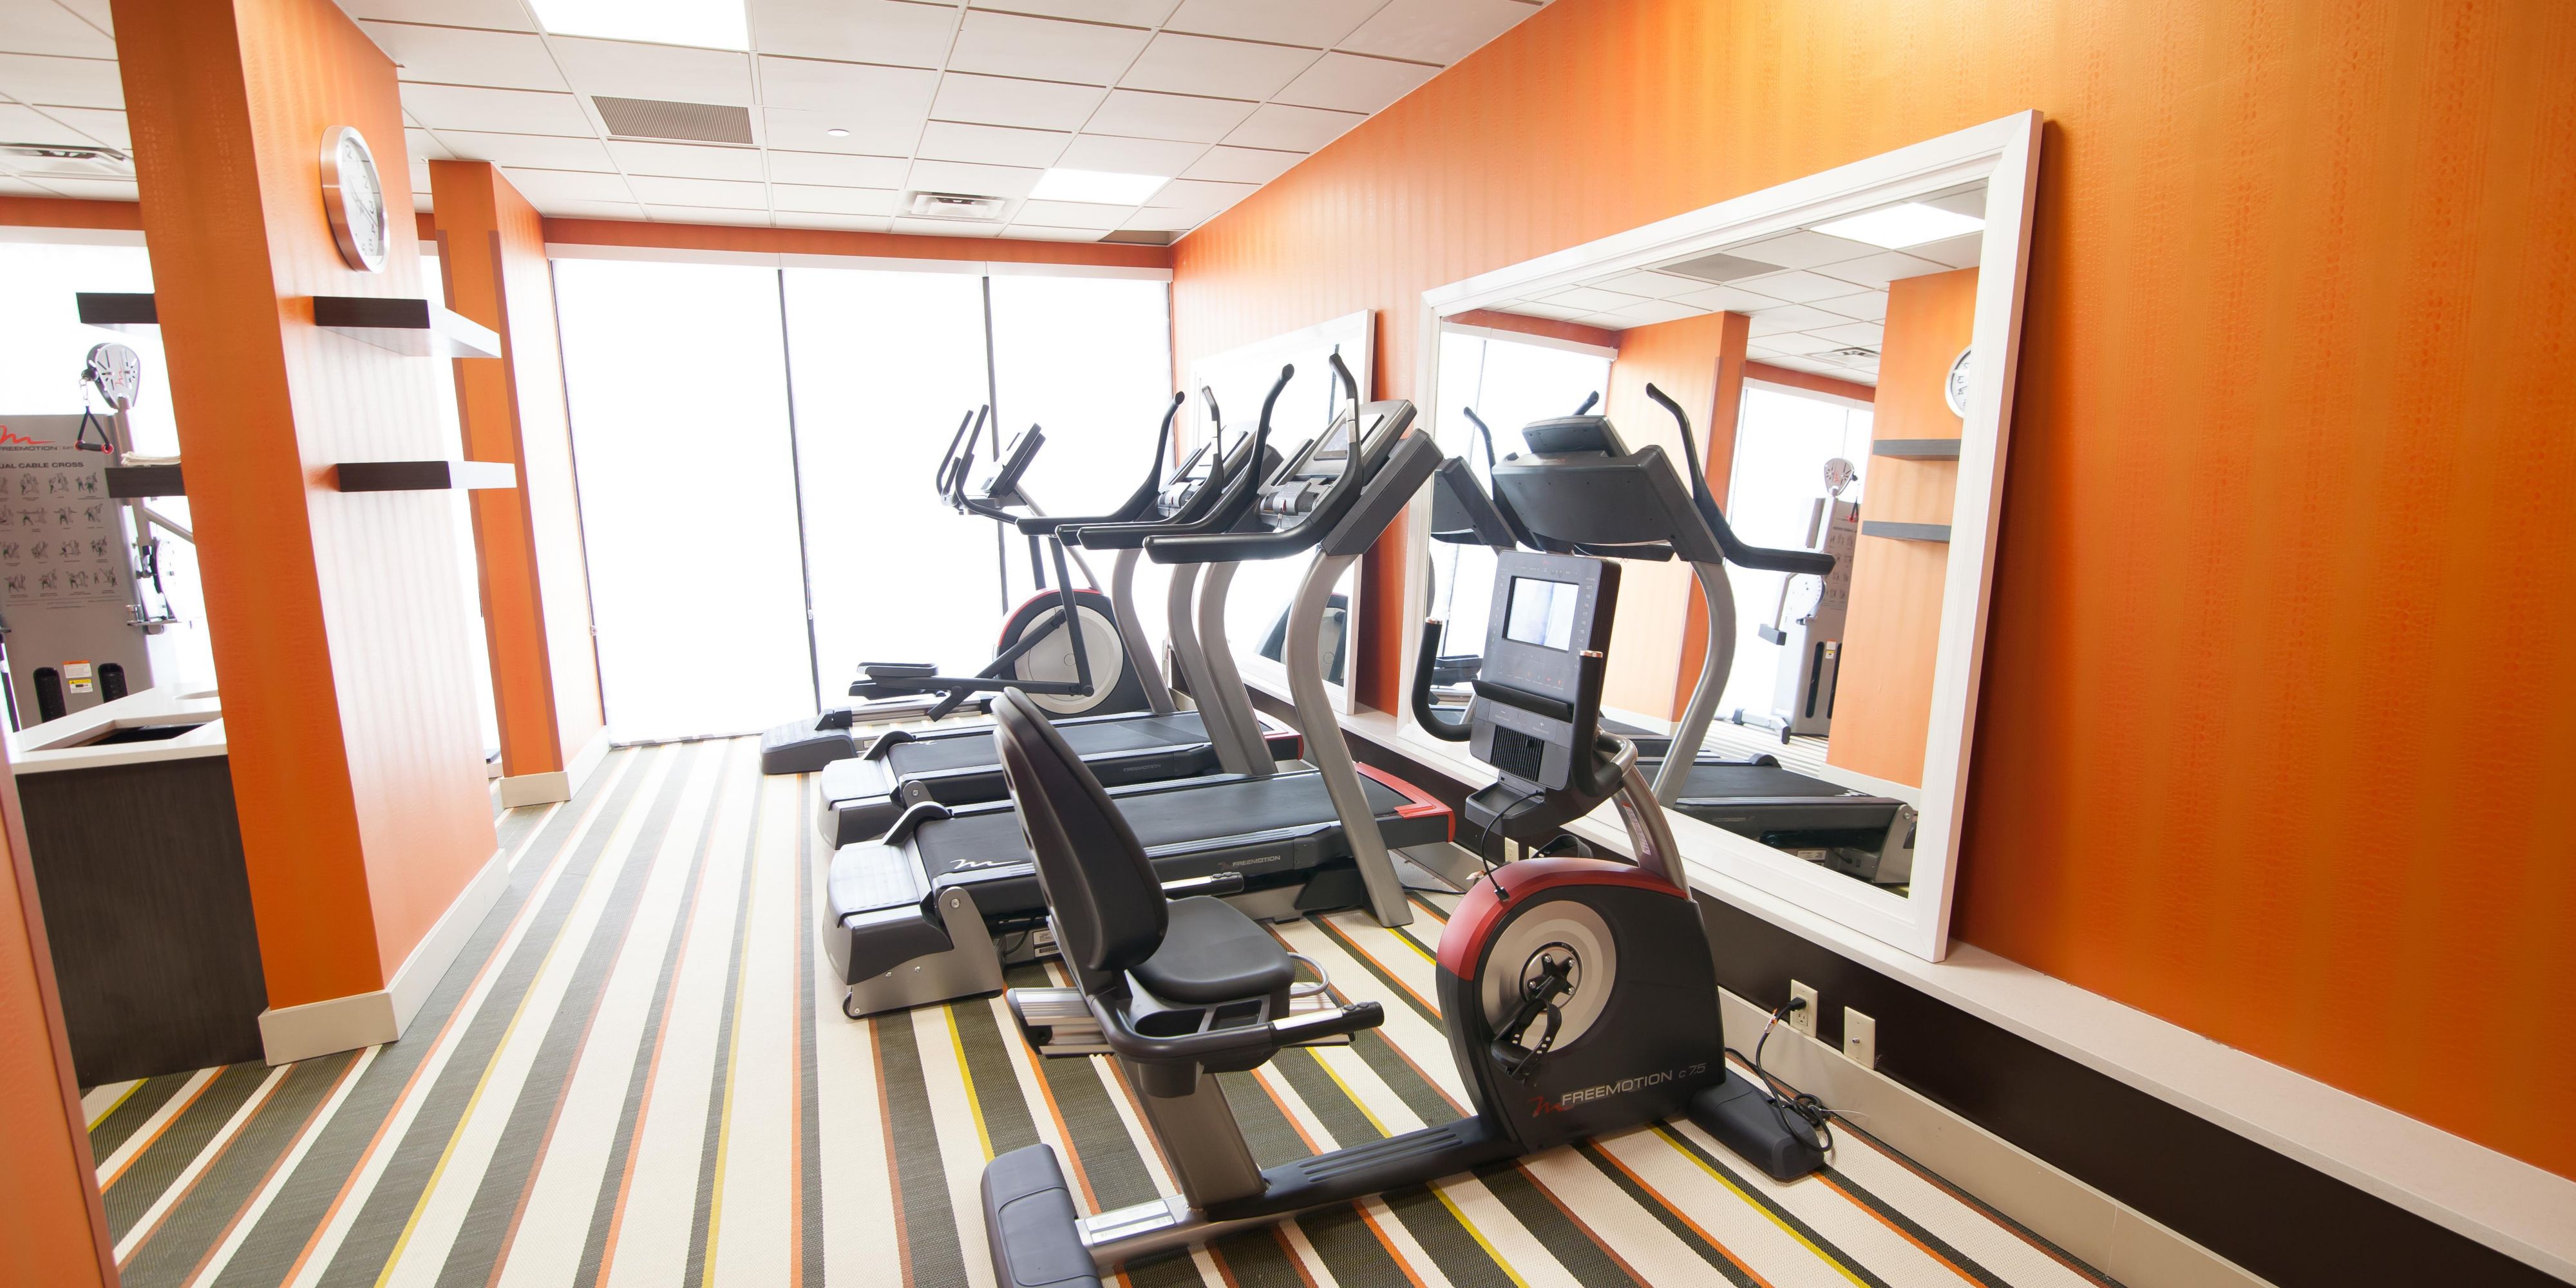 Stay active while you're on the road! Our well-equipped fitness center has a variety of equipment including treadmills, stationary bikes, free weights, kettle bells, and elliptical machines - plenty to get a full workout in!